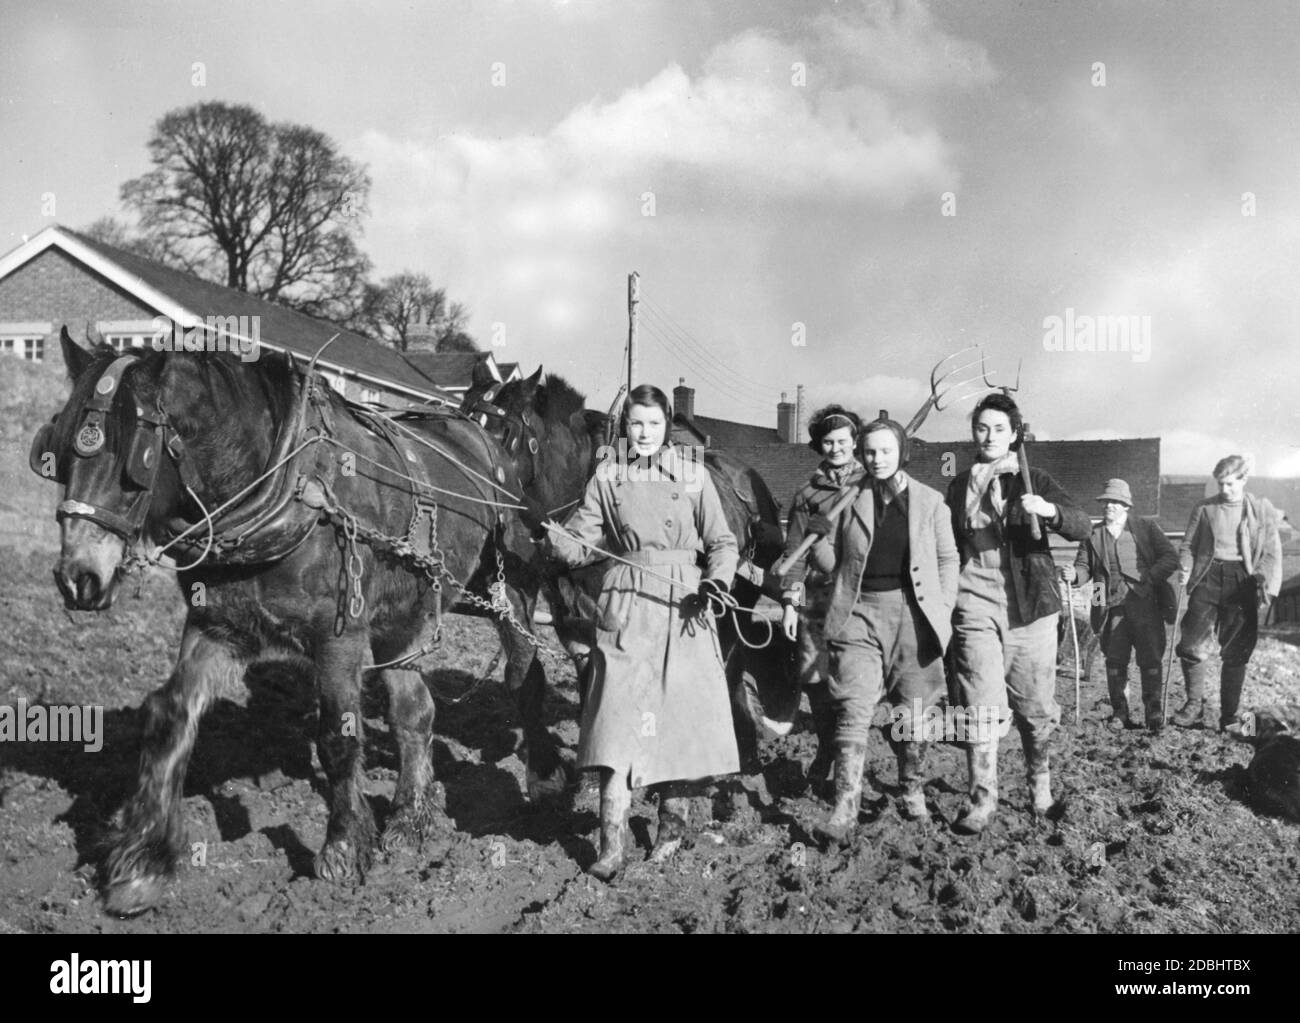 Members of the Women's Land Army plowing a field. Stock Photo